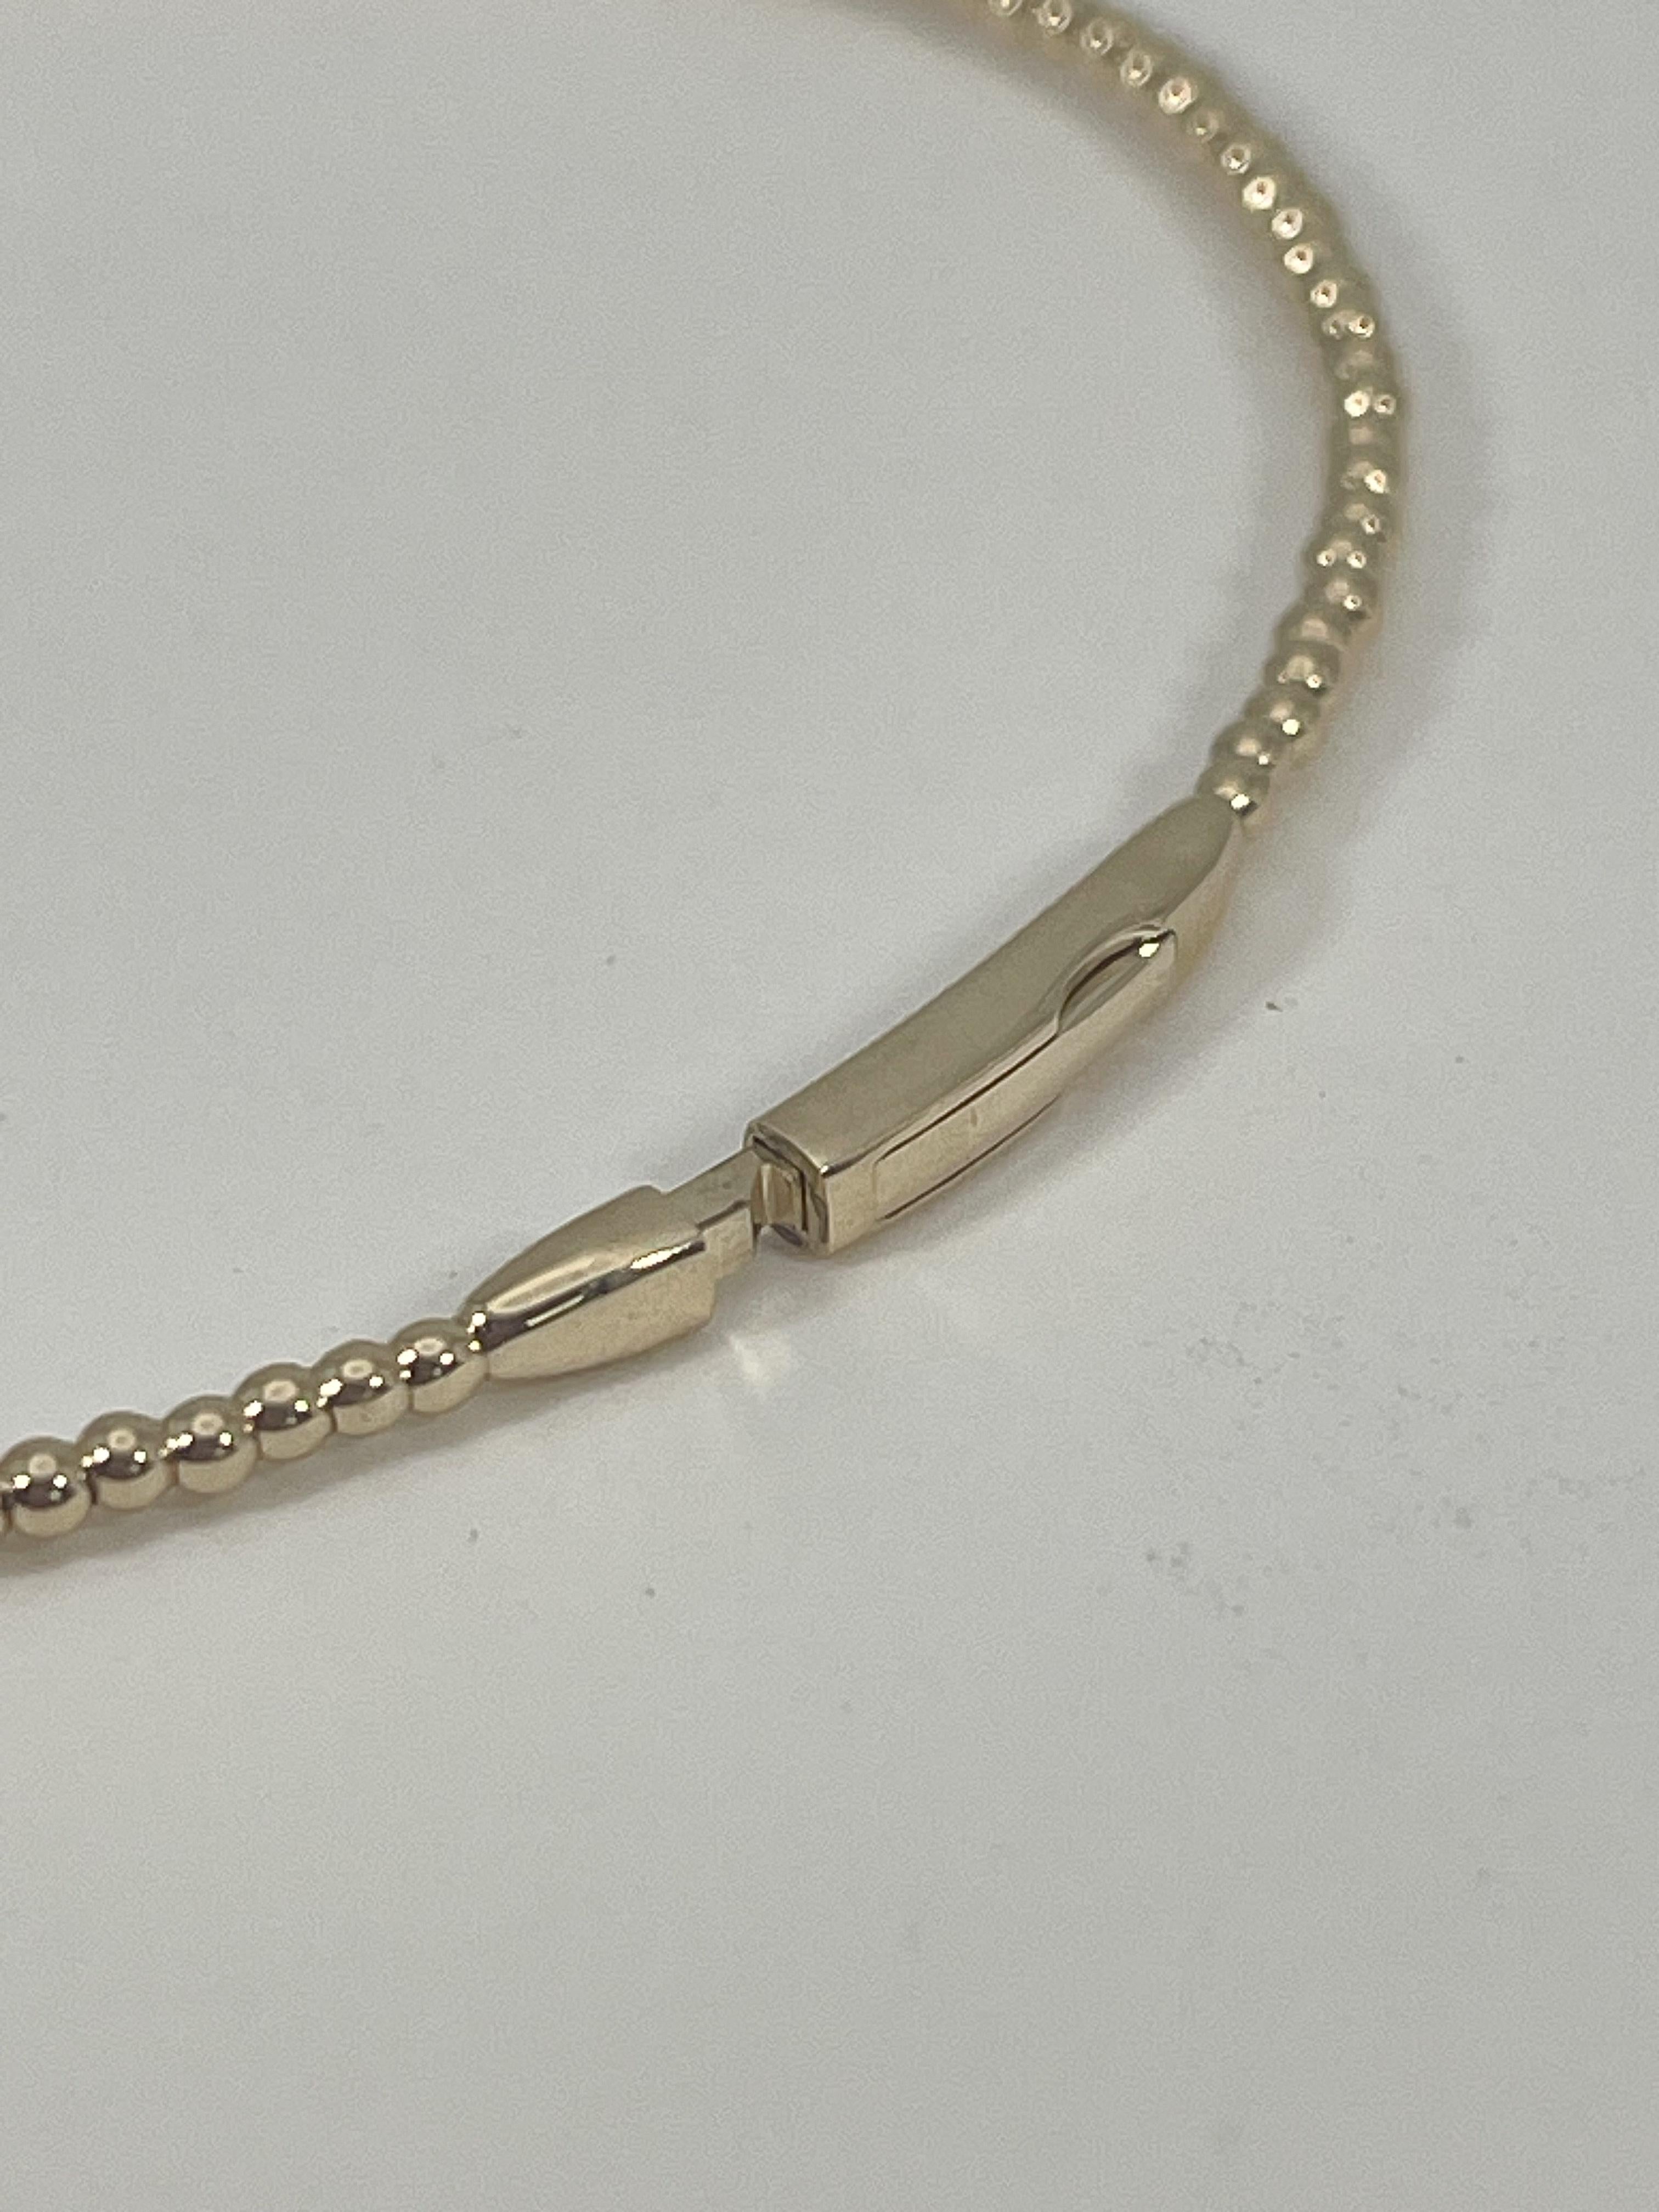 14k yellow gold .24 CTW diamond bangle. This bangle has a beaded design around the bangle with round diamonds in the center, this bracelet will fit a wrist up to 6 inches, the width of the bracelet is 1.7mm around the bracelet, the center of the